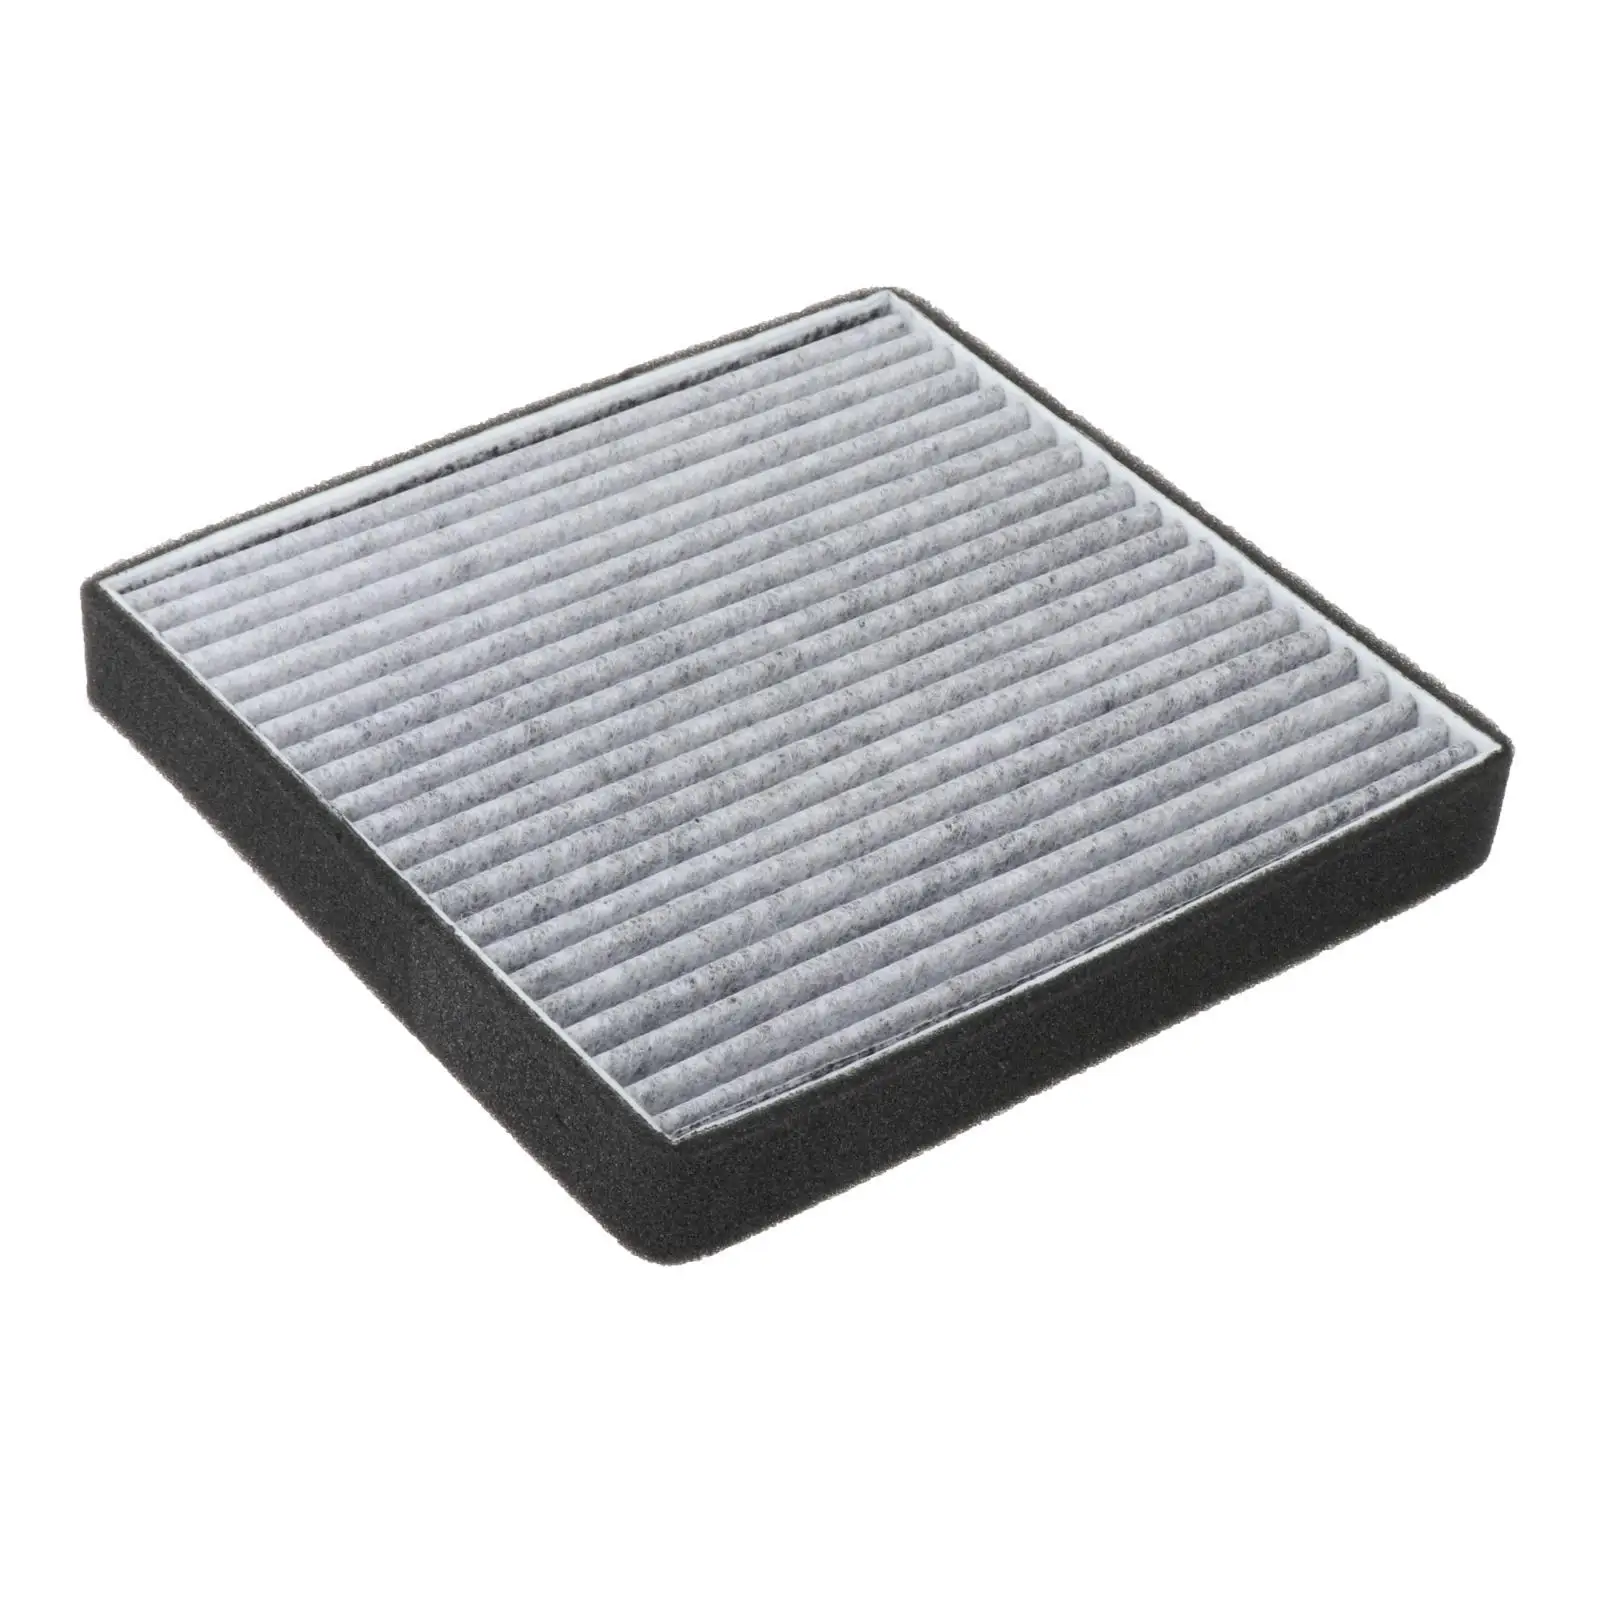 Car Cabin Air Filter HEPA for Byd Atto 3 Yuan Plus Replacement Durable